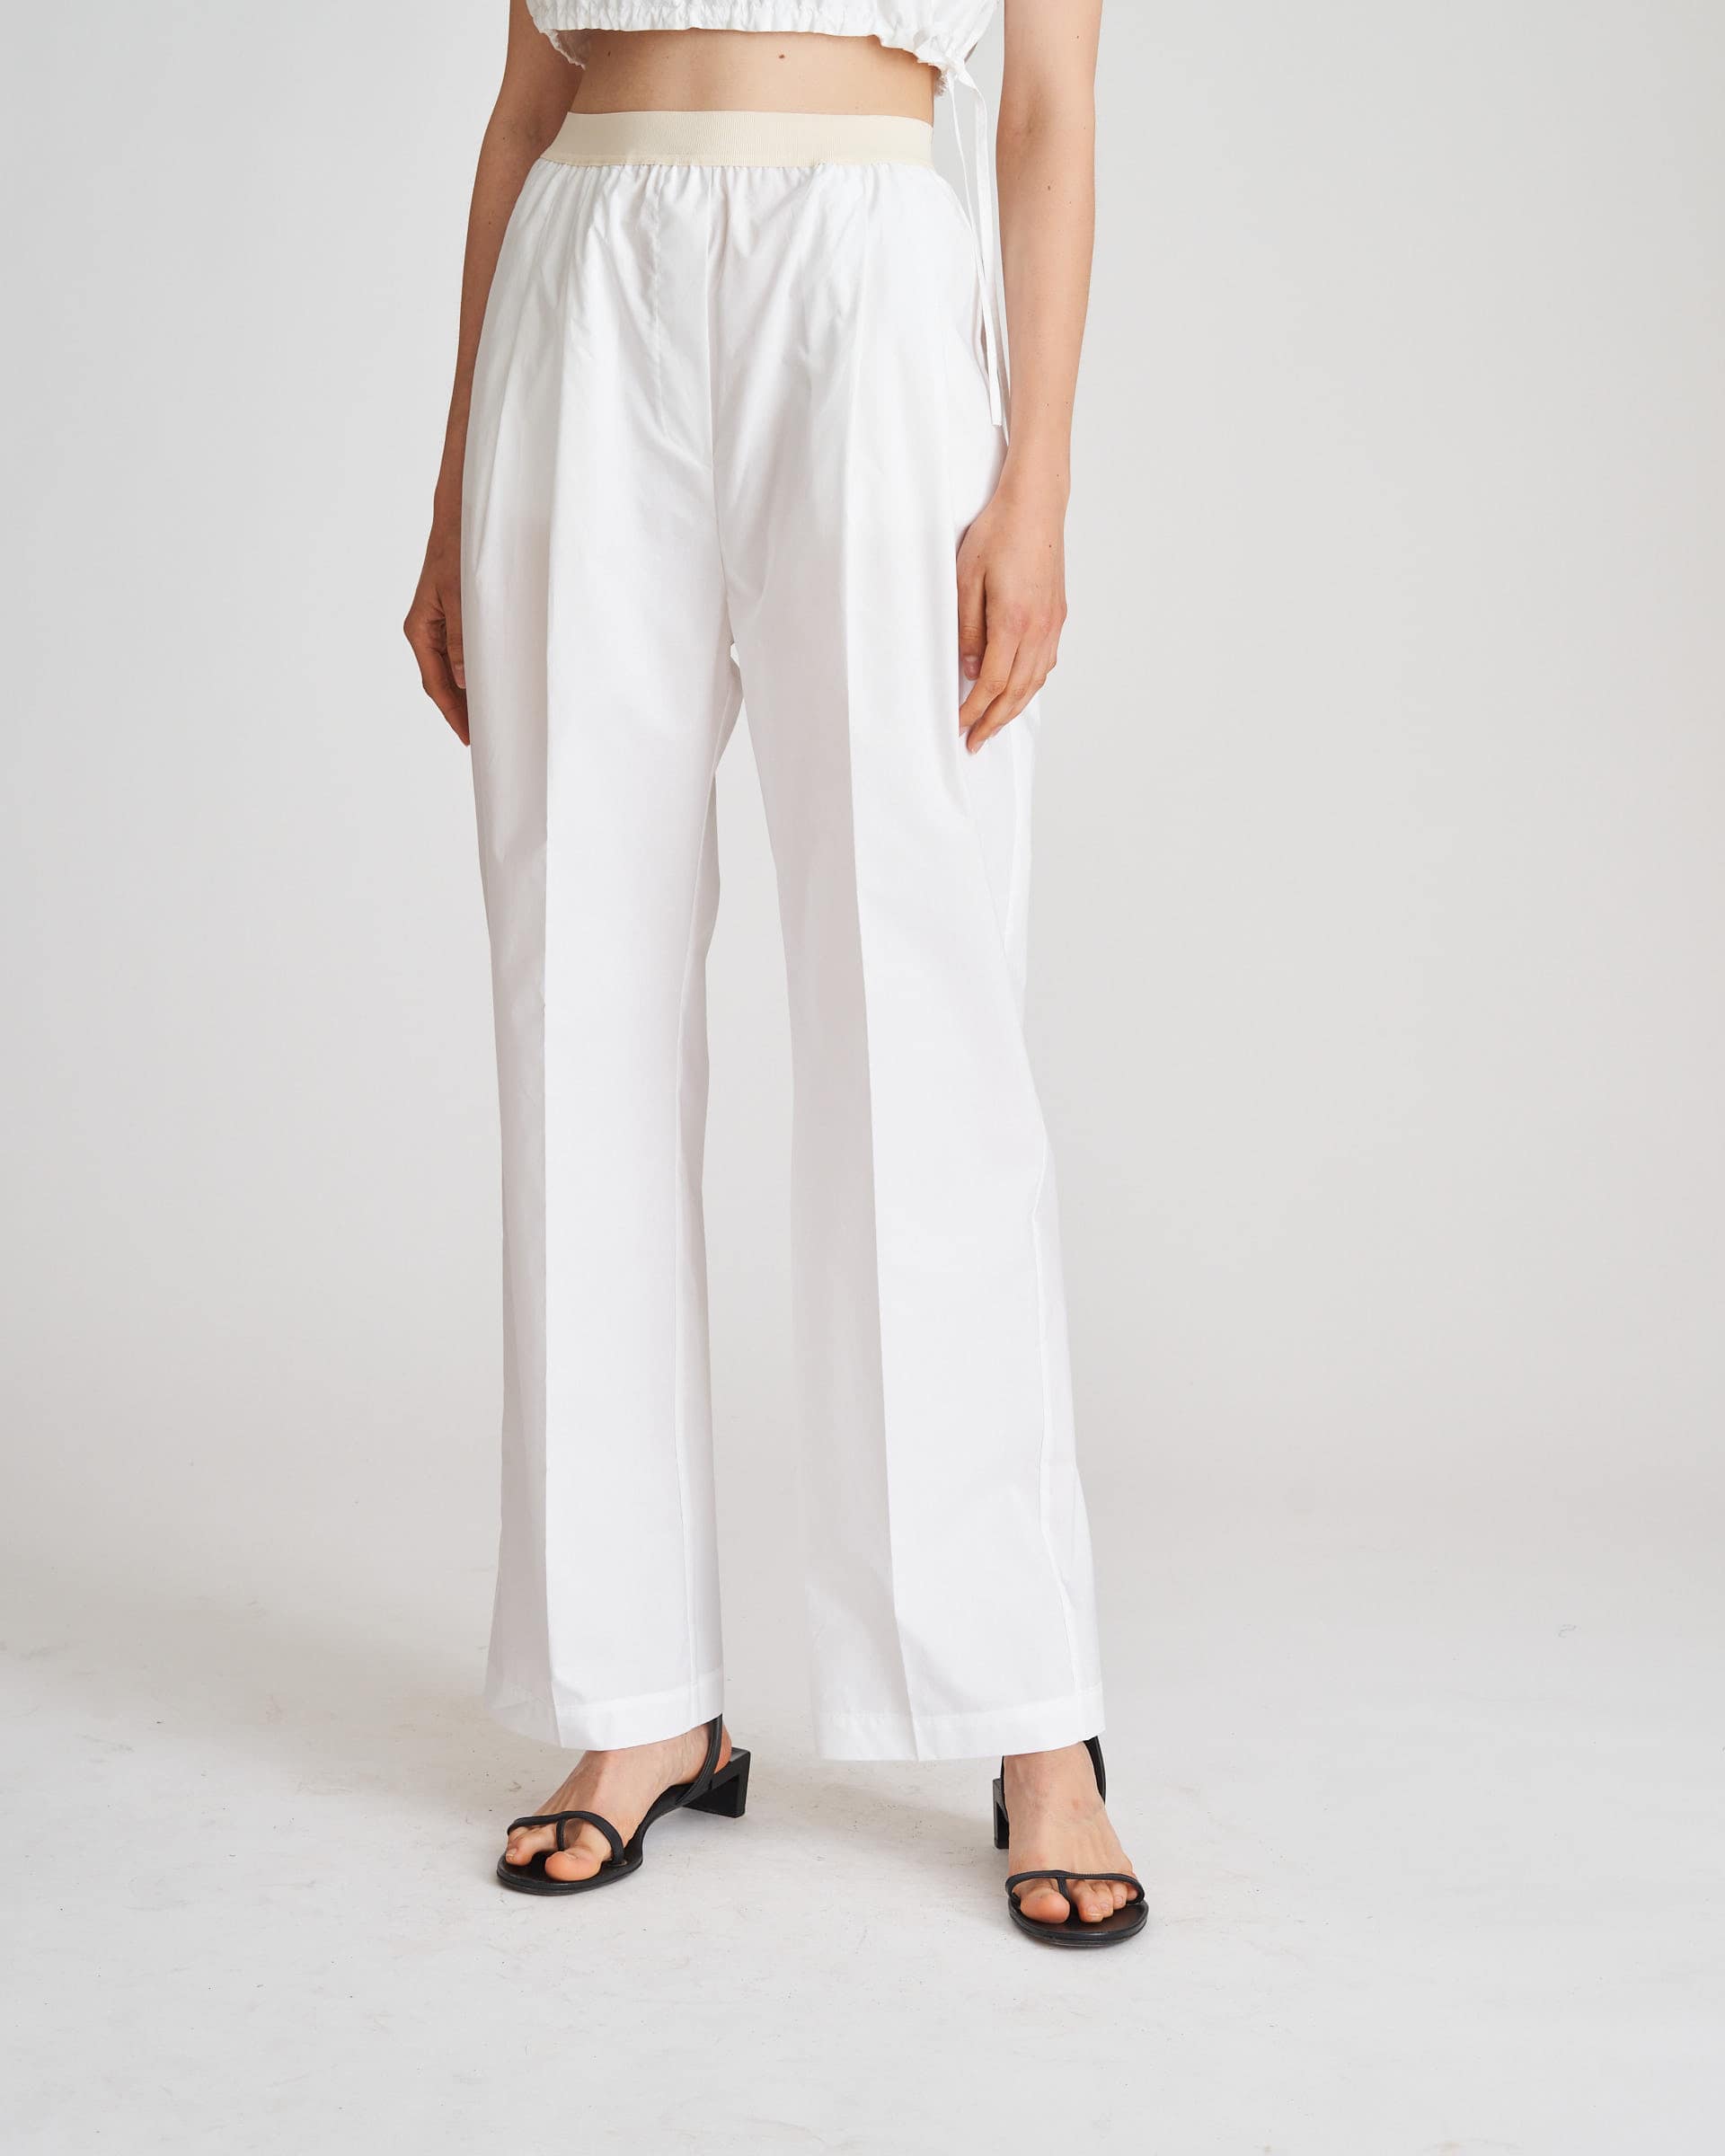 The Market Store | Pants With Pinces And Elastic